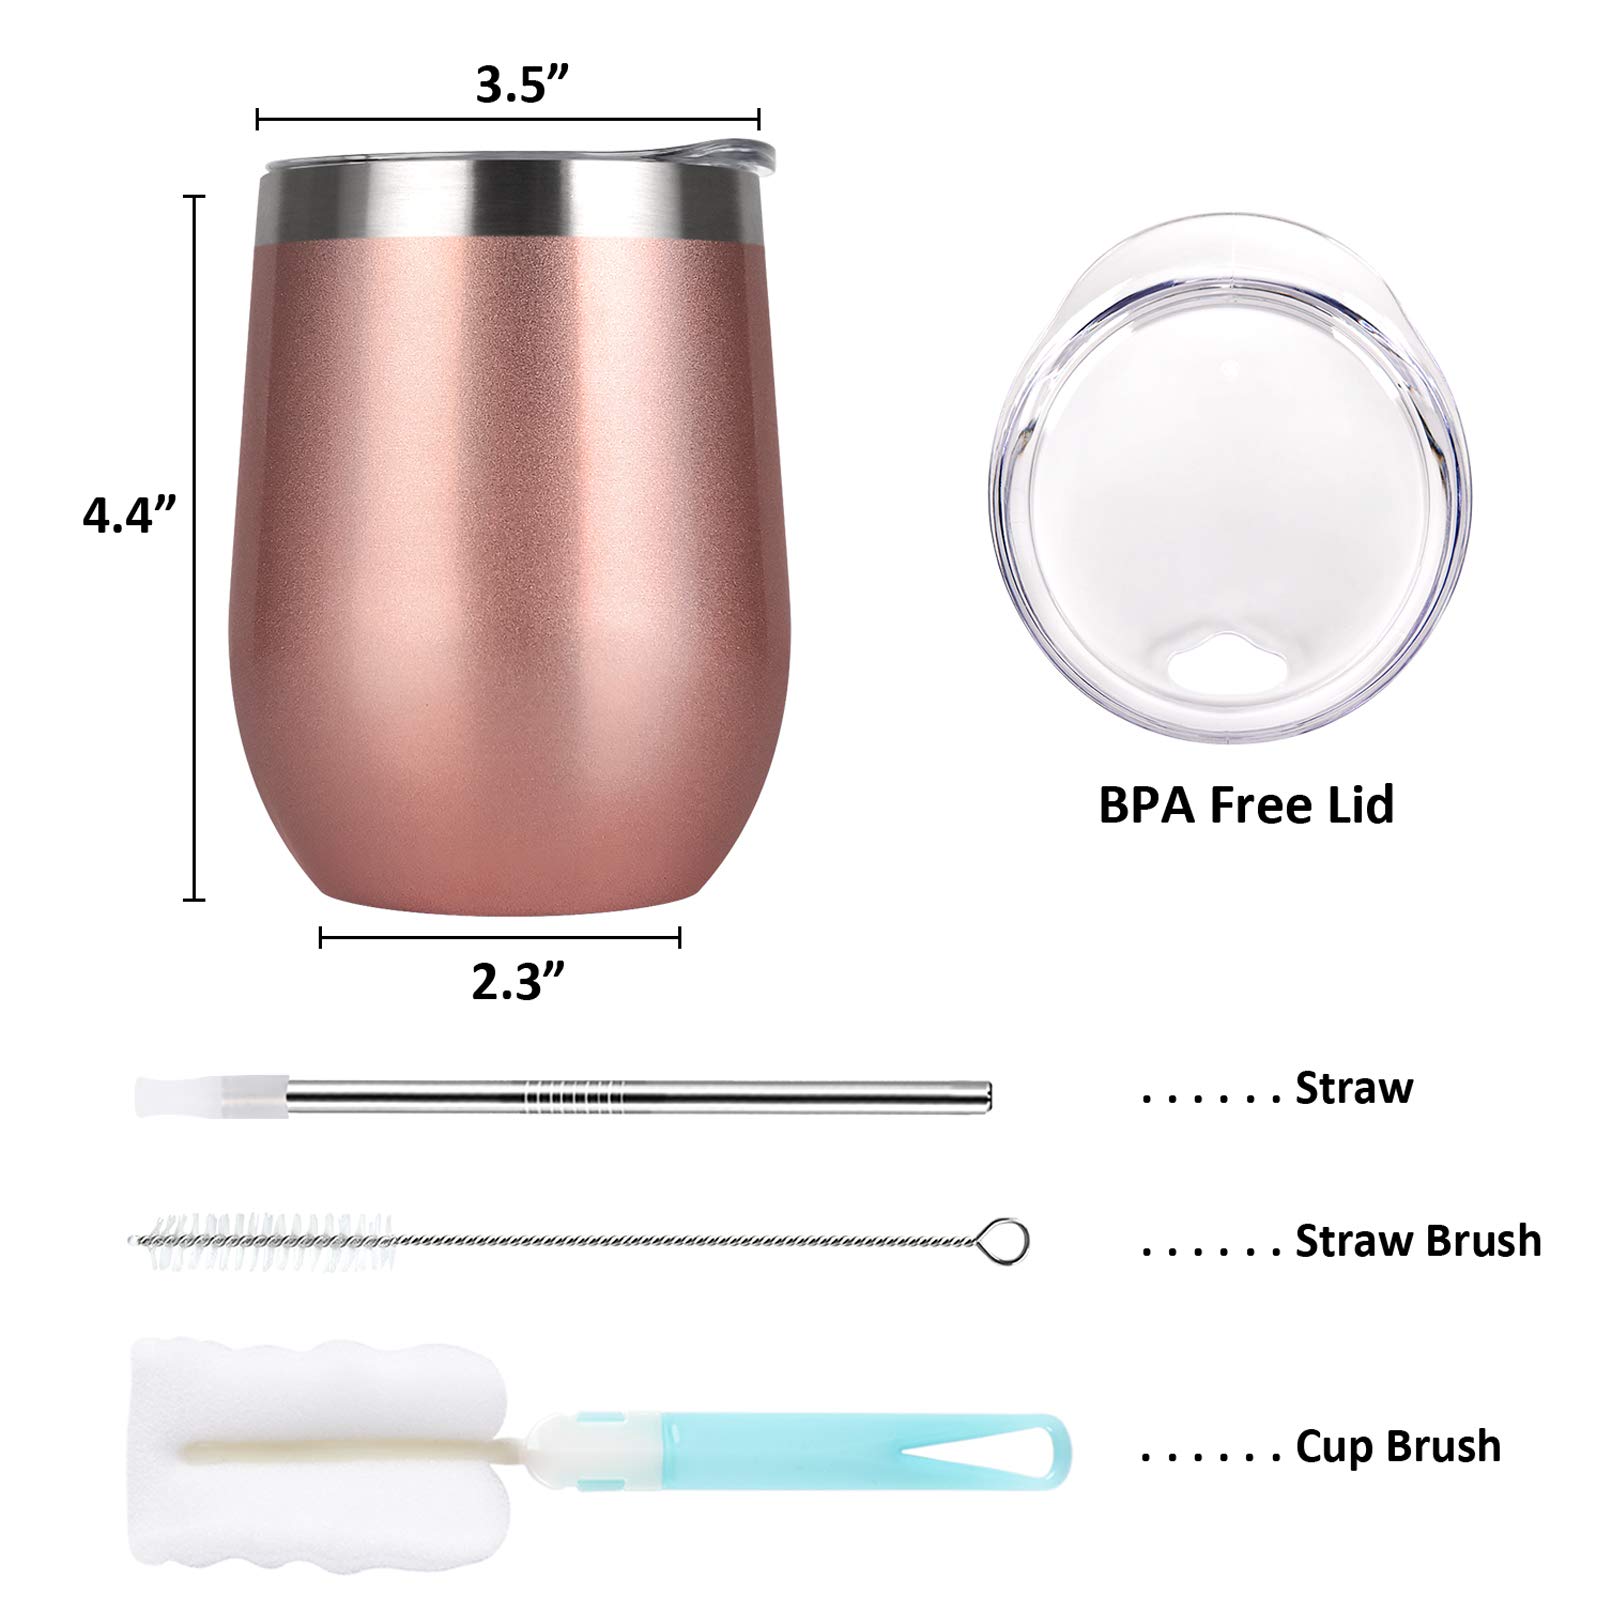 12 Pack Stainless Steel Wine Tumbler with Lid and Straw, 12 Oz Double Wall Vacuum Insulated Stemless Wine Glass Tumbler, Set of 12 Cup for Wine, Coffee, Champagne, Cocktails, Ice Cream, Rose Gold